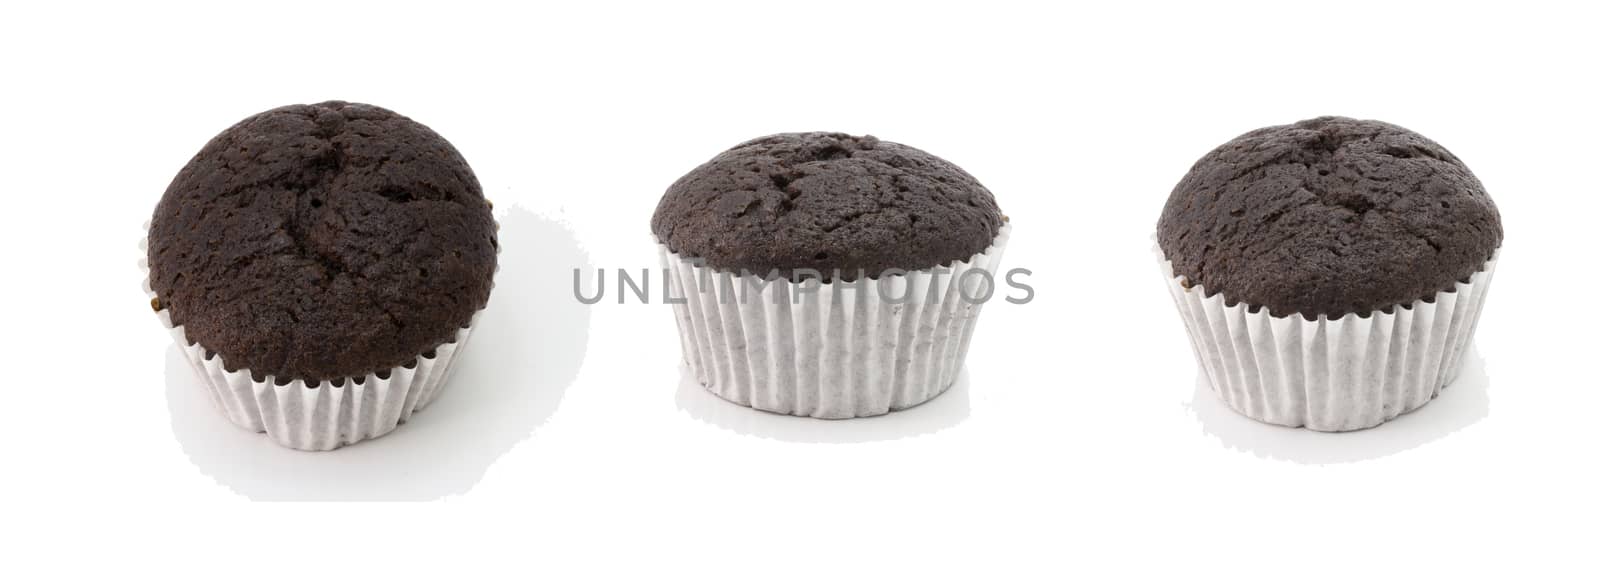 banana cup cake, chocolate cup cake isolated on white by chingraph